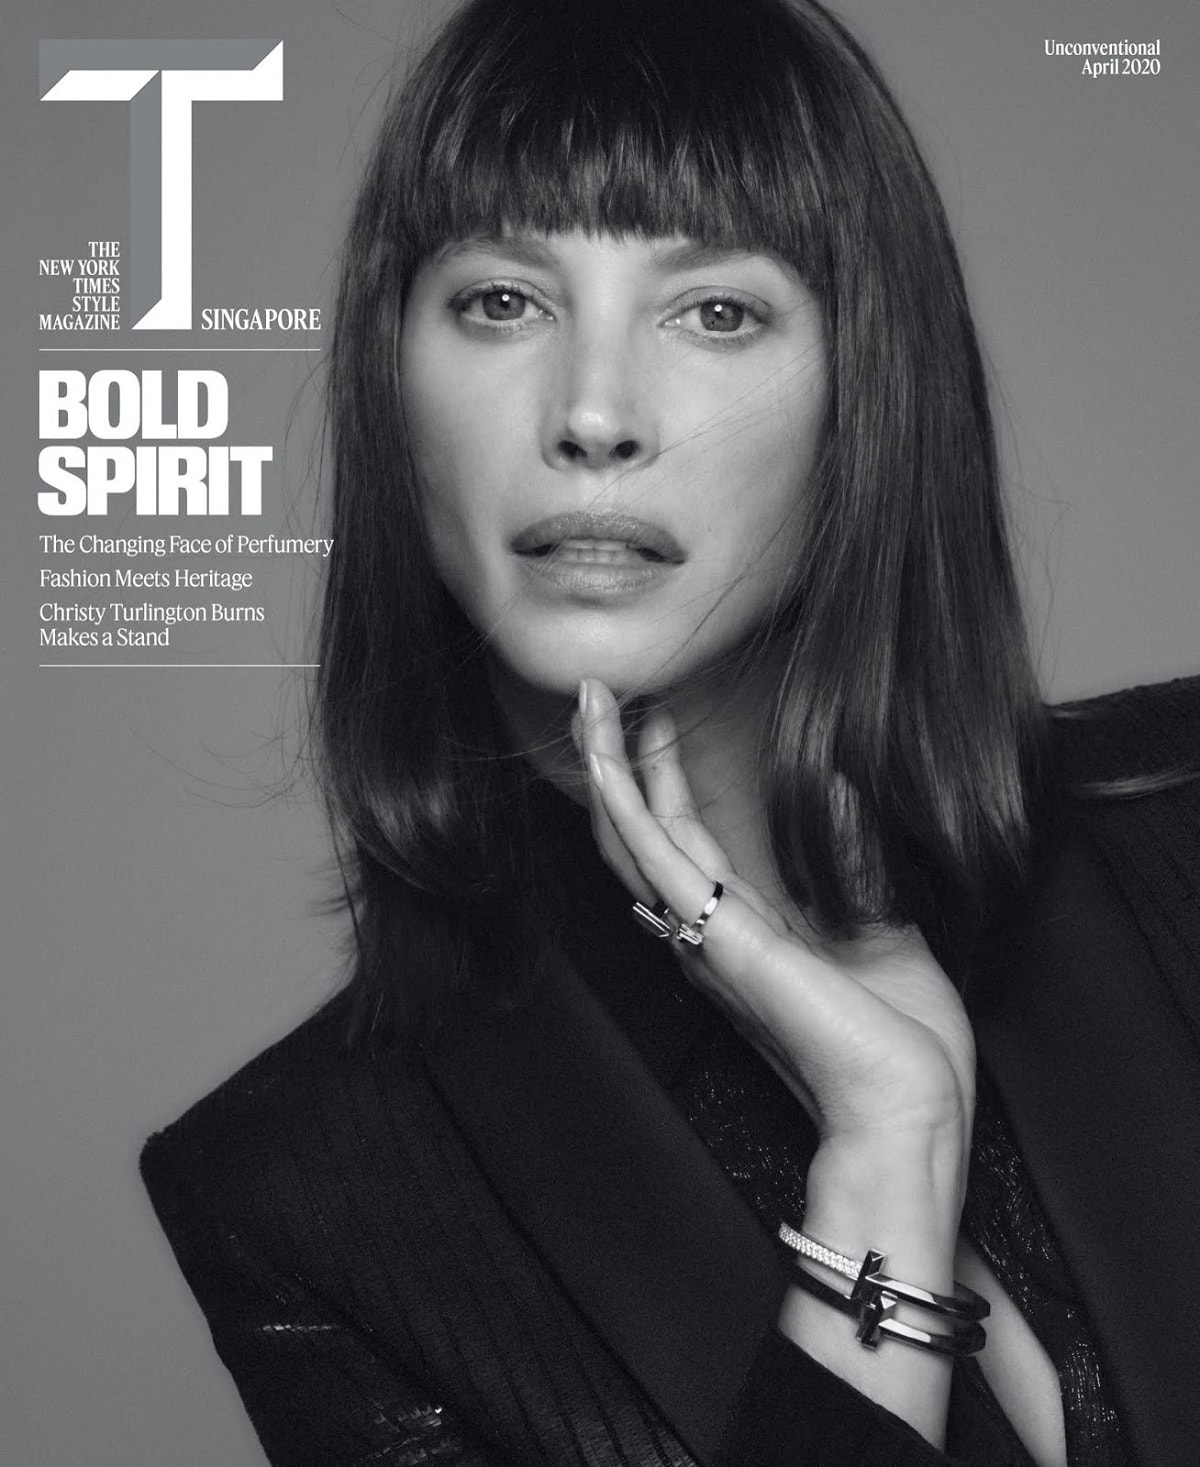 Christy Turlington By Chris Colls For The New York Times Style Magazine Singapore April 2020